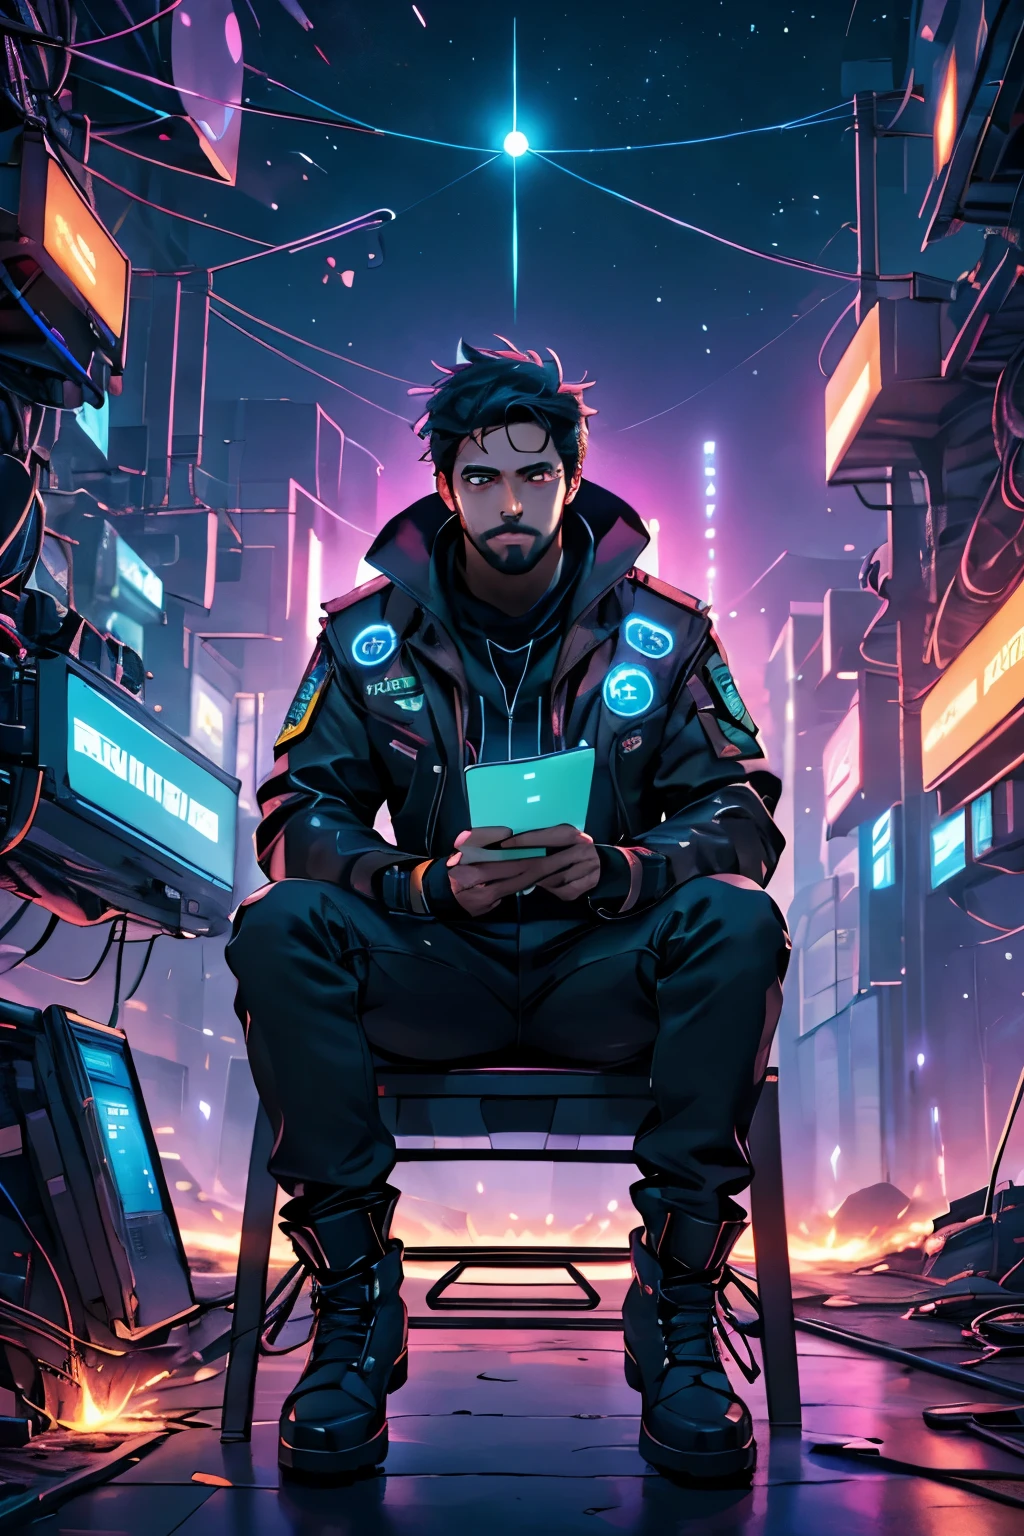 Desenhe um jovem otako, sitting on a research platform floating in the middle of an asteroid belt. He is studying with a notebook, surrounded by several asteroids glowing with fiery auras. Dramatic lighting from distant stars and planets illuminates the scene, casting deep shadows on the costume. O jovem parece confiante e determinado, looking at the vast and mysterious universe with awe and respect,Facial hair, tiro de vaqueiro,